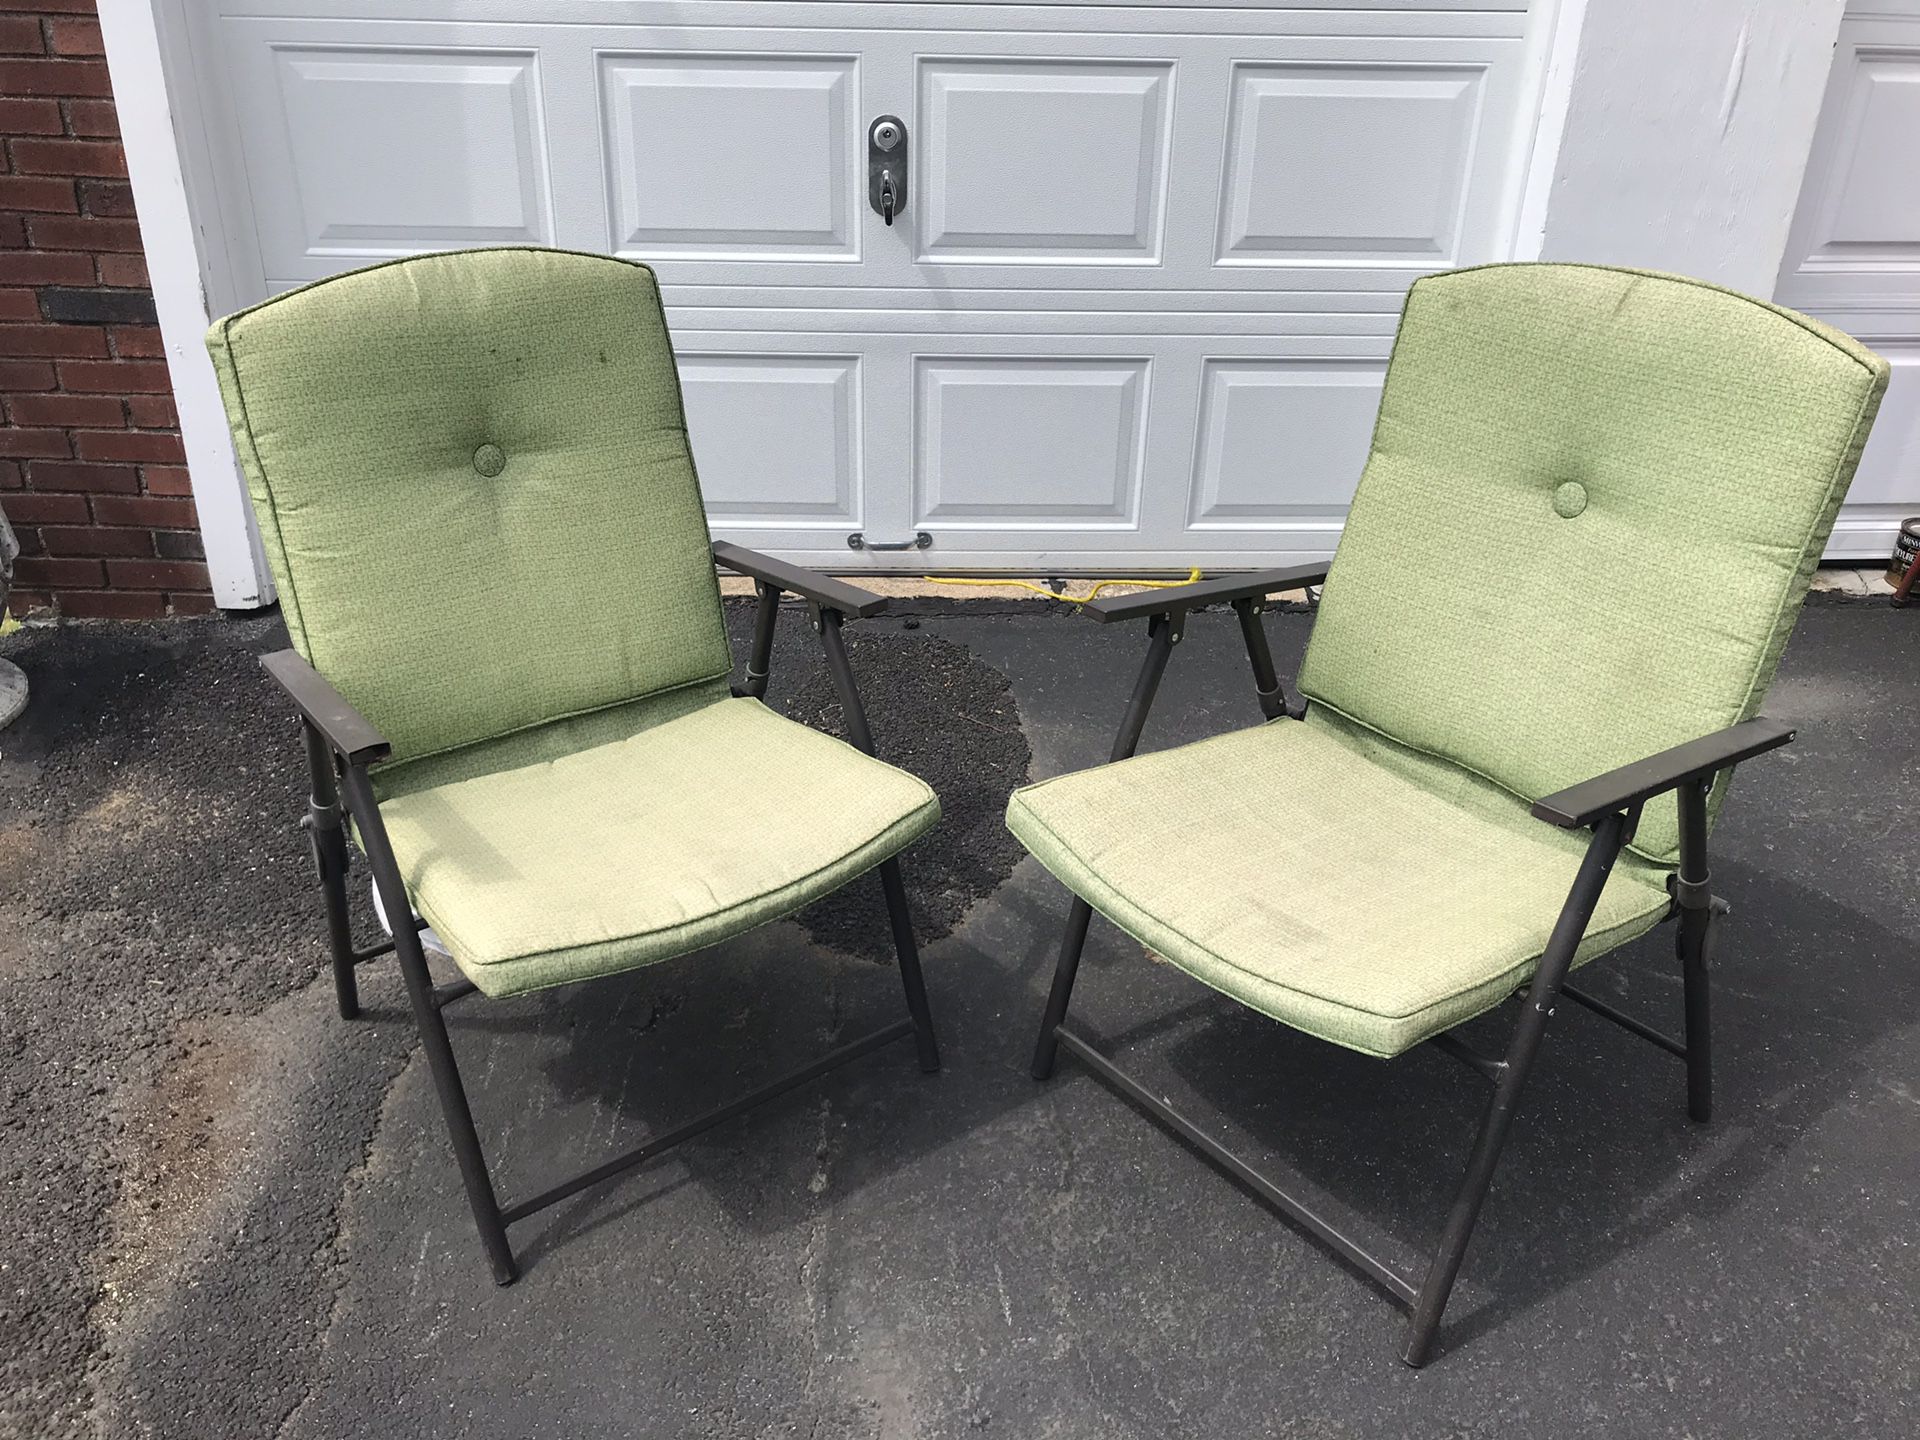 2 green pillowed comfortable outdoor/indoor patio furniture chairs. (Foldable)